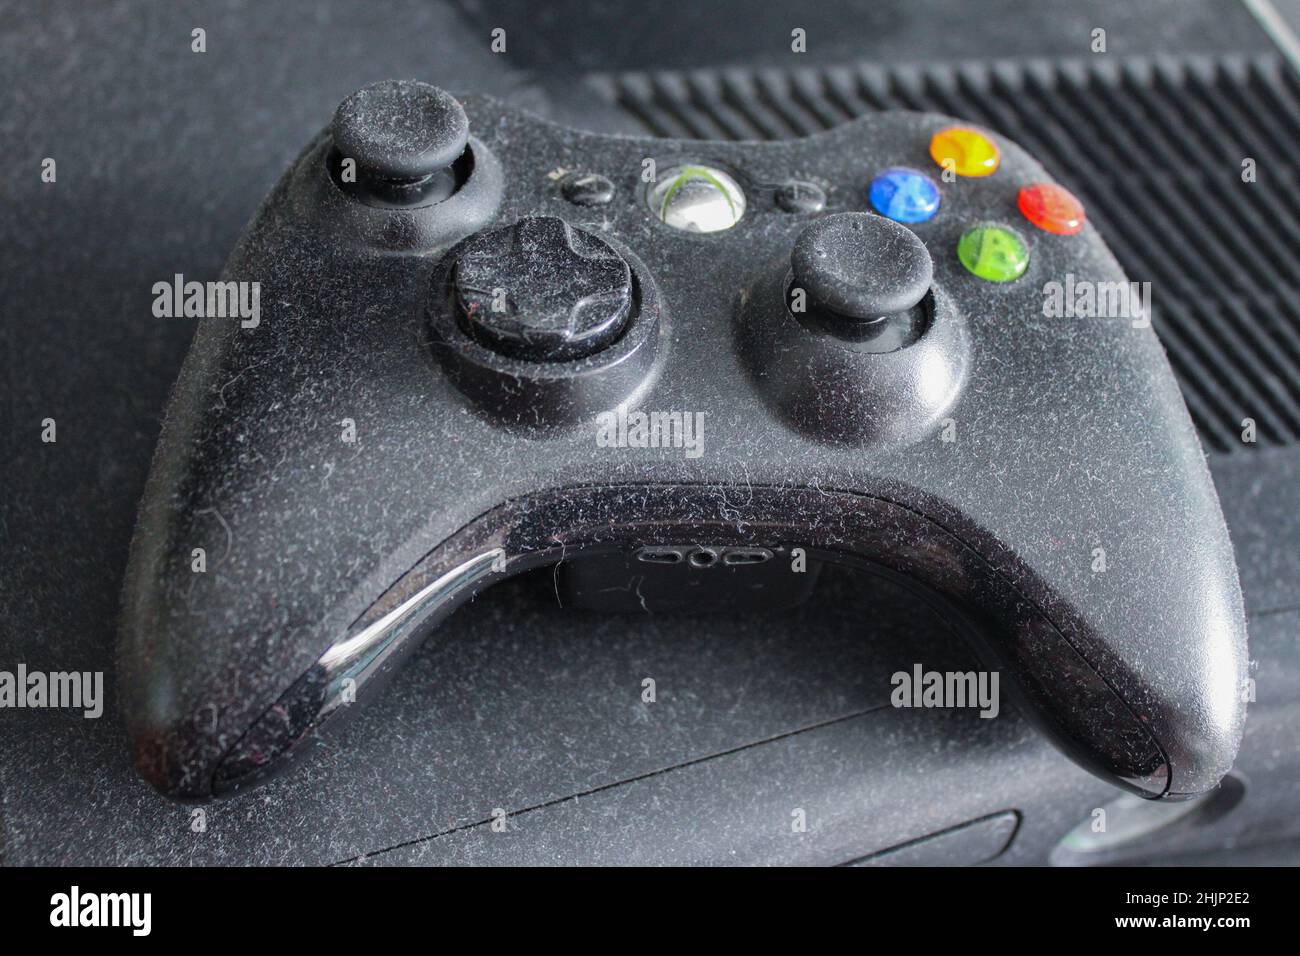 Xbox 360 console black hi-res stock photography and images - Alamy